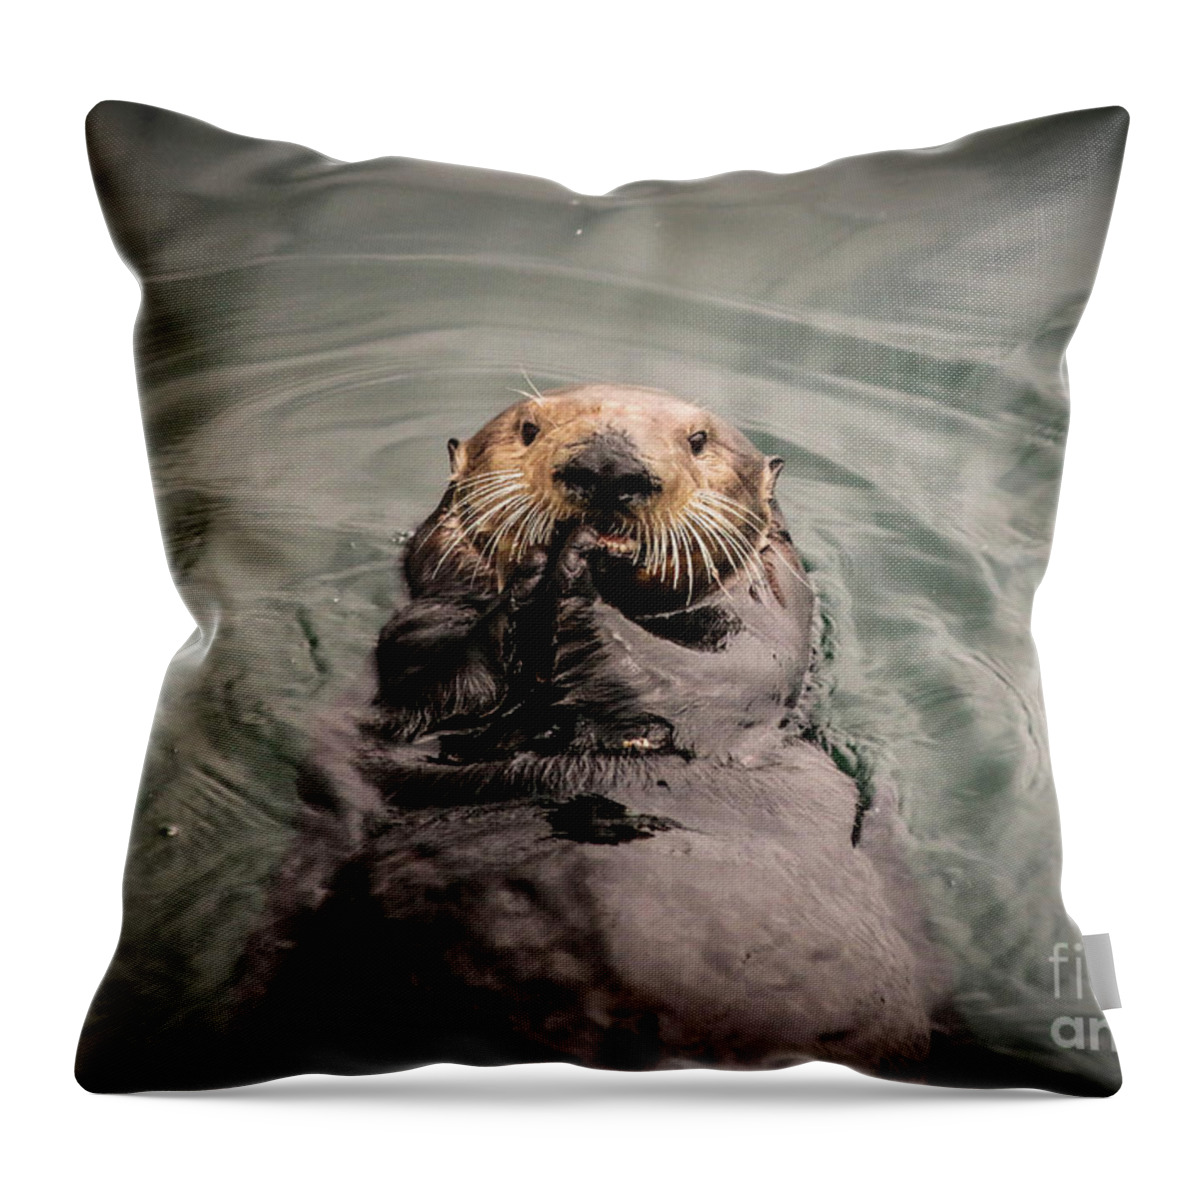 Sea Otter Throw Pillow featuring the photograph Sea Otter Monterey Bay II by Veronica Batterson